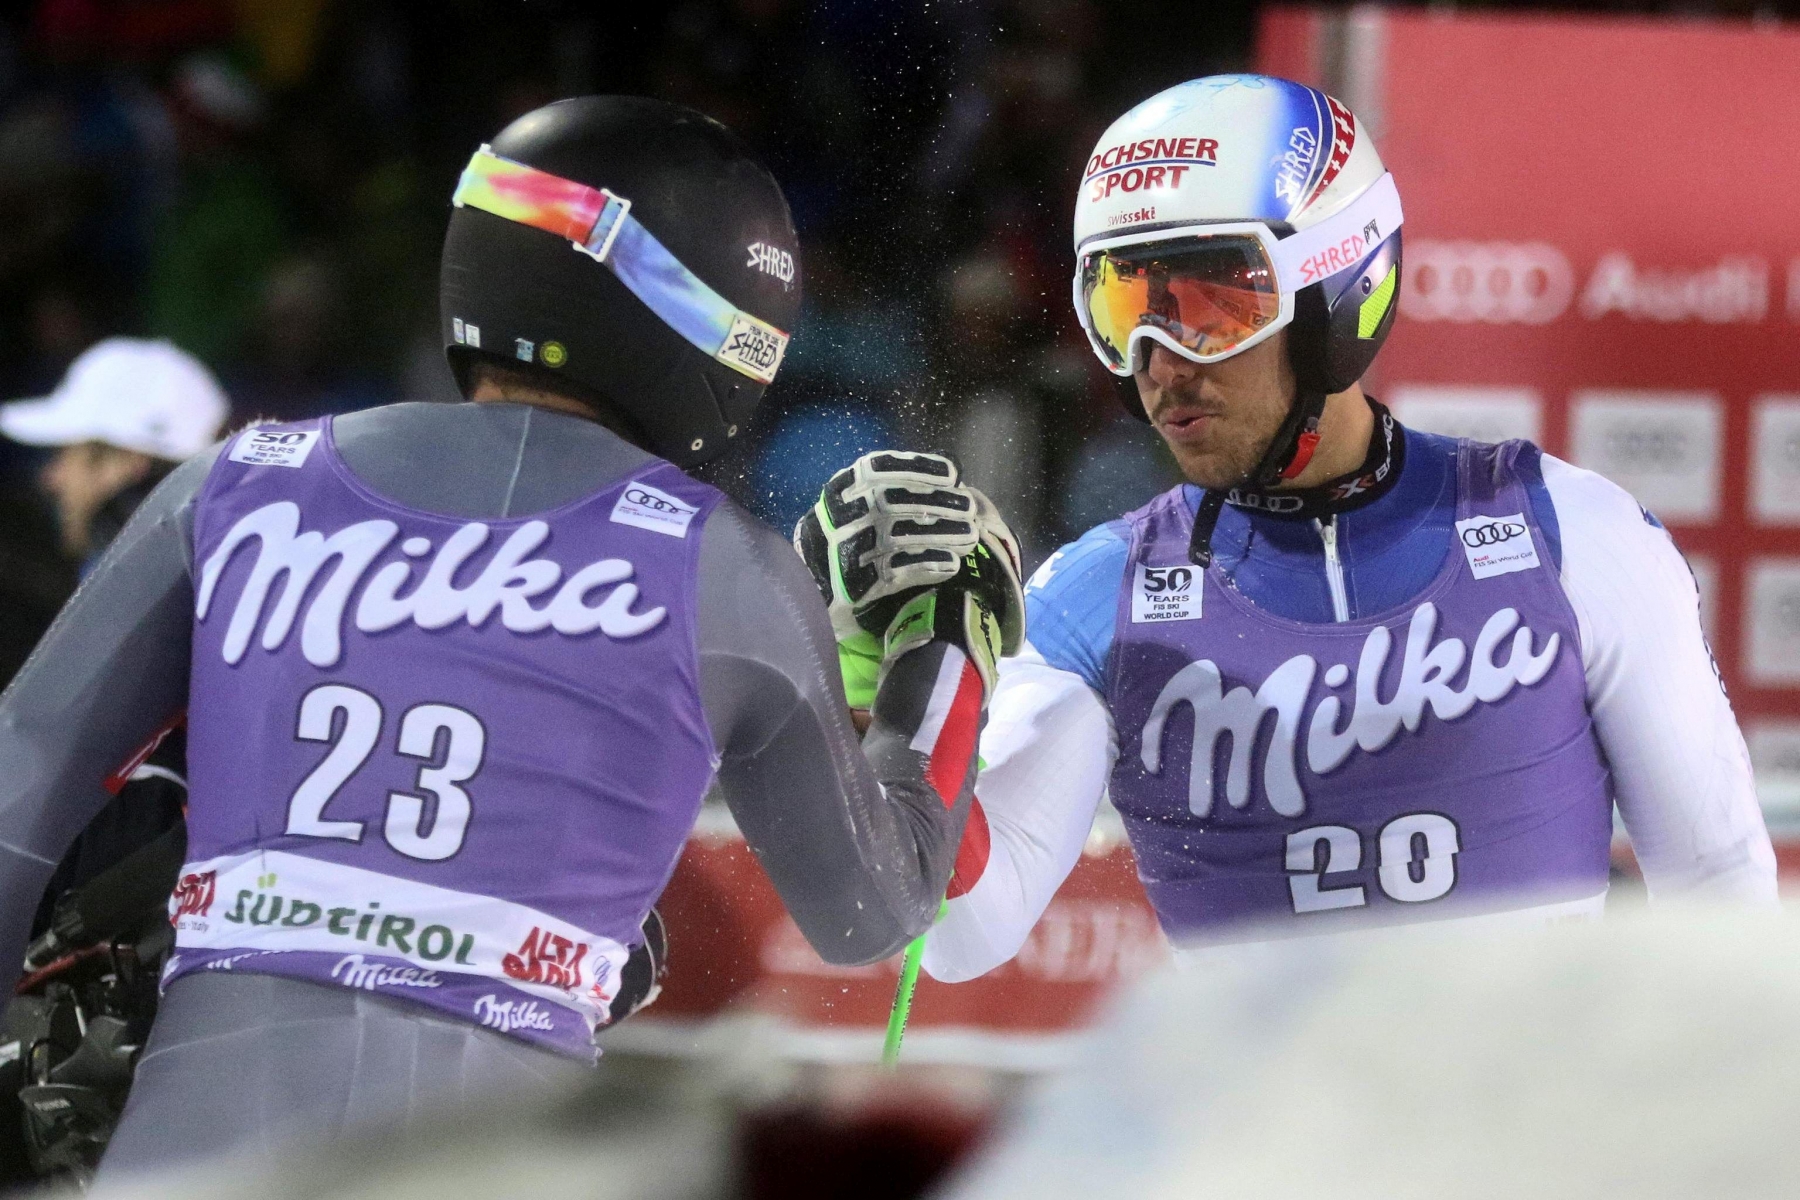 epa05682680 Cyprien Sarrazin, left, of France celebrates with Carlo Janka of Switzerland in the finish area after the Men's Parallel Giant Slalom race at the FIS Alpine Skiing World Cup event in Alta Badia, Italy, 19 December 2016. Sarrazin won ahead second placed Carlo Janka of Switzerland, and third placed Kjetil Jansrud of Norway.  EPA/ANDREA SOLERO